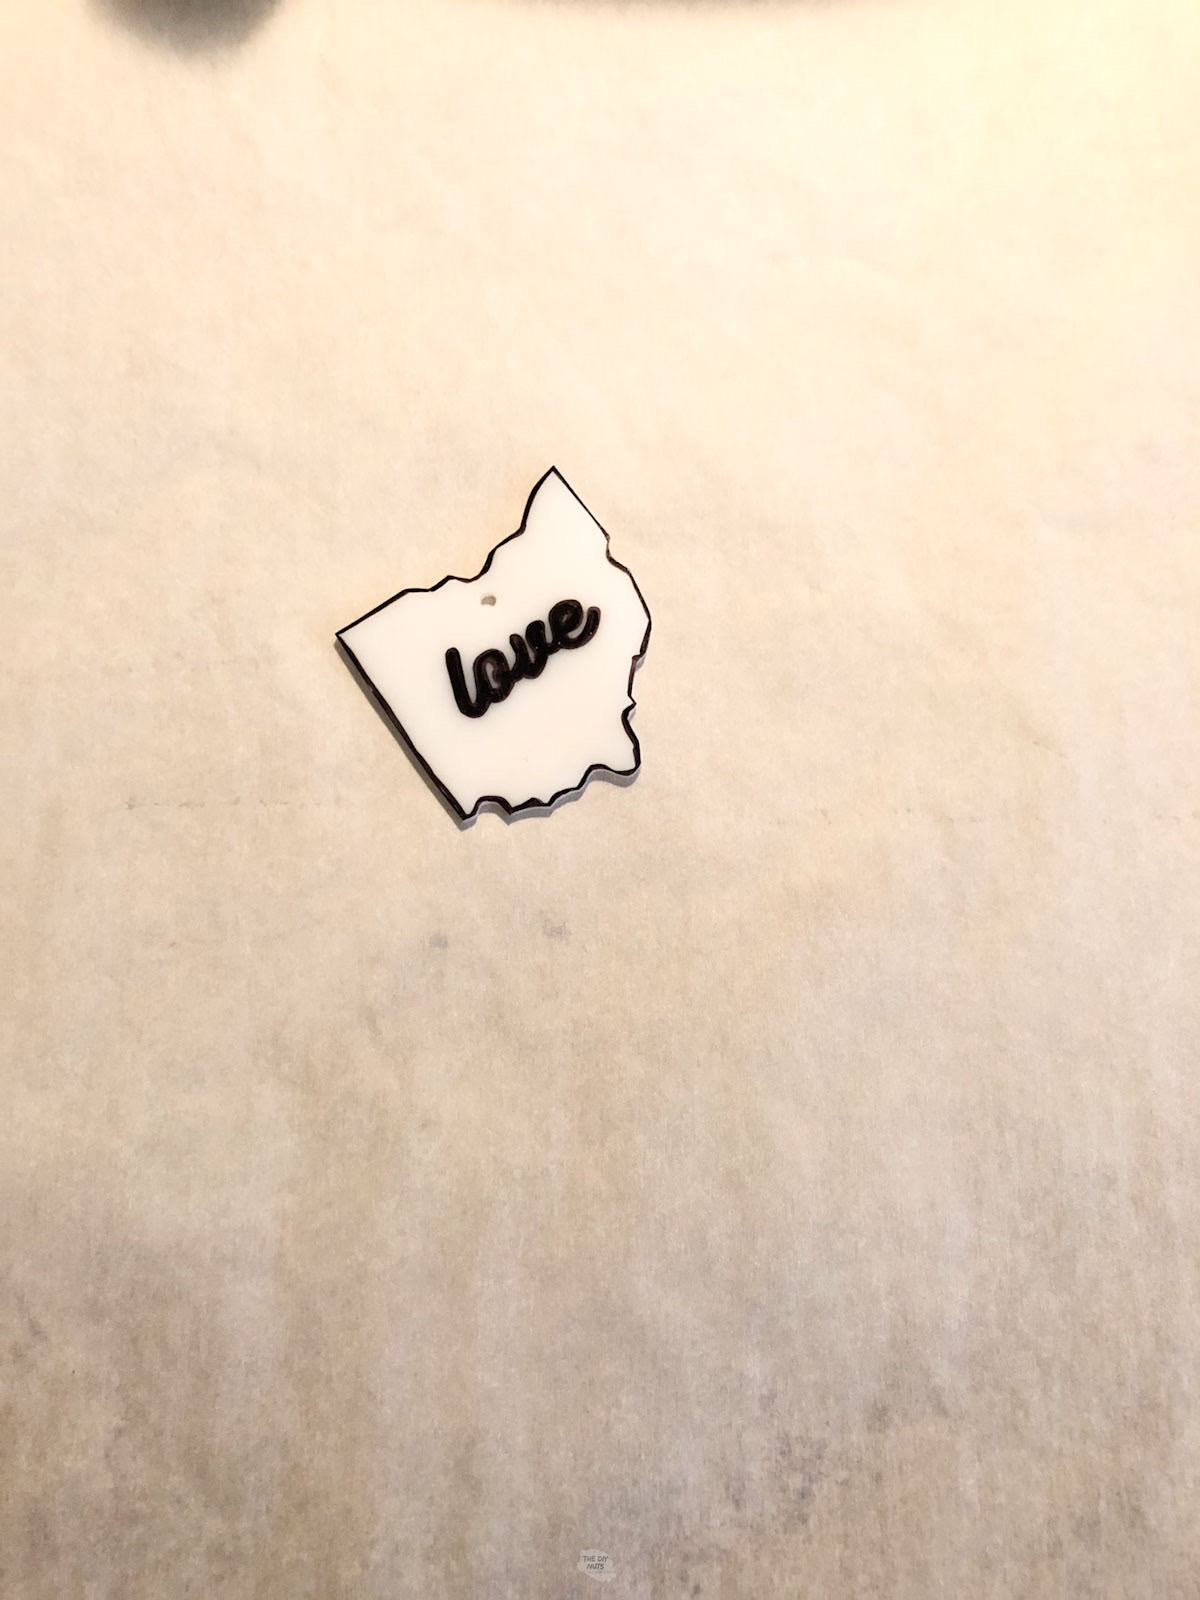 shrinky dink of ohio with cursive love inside.